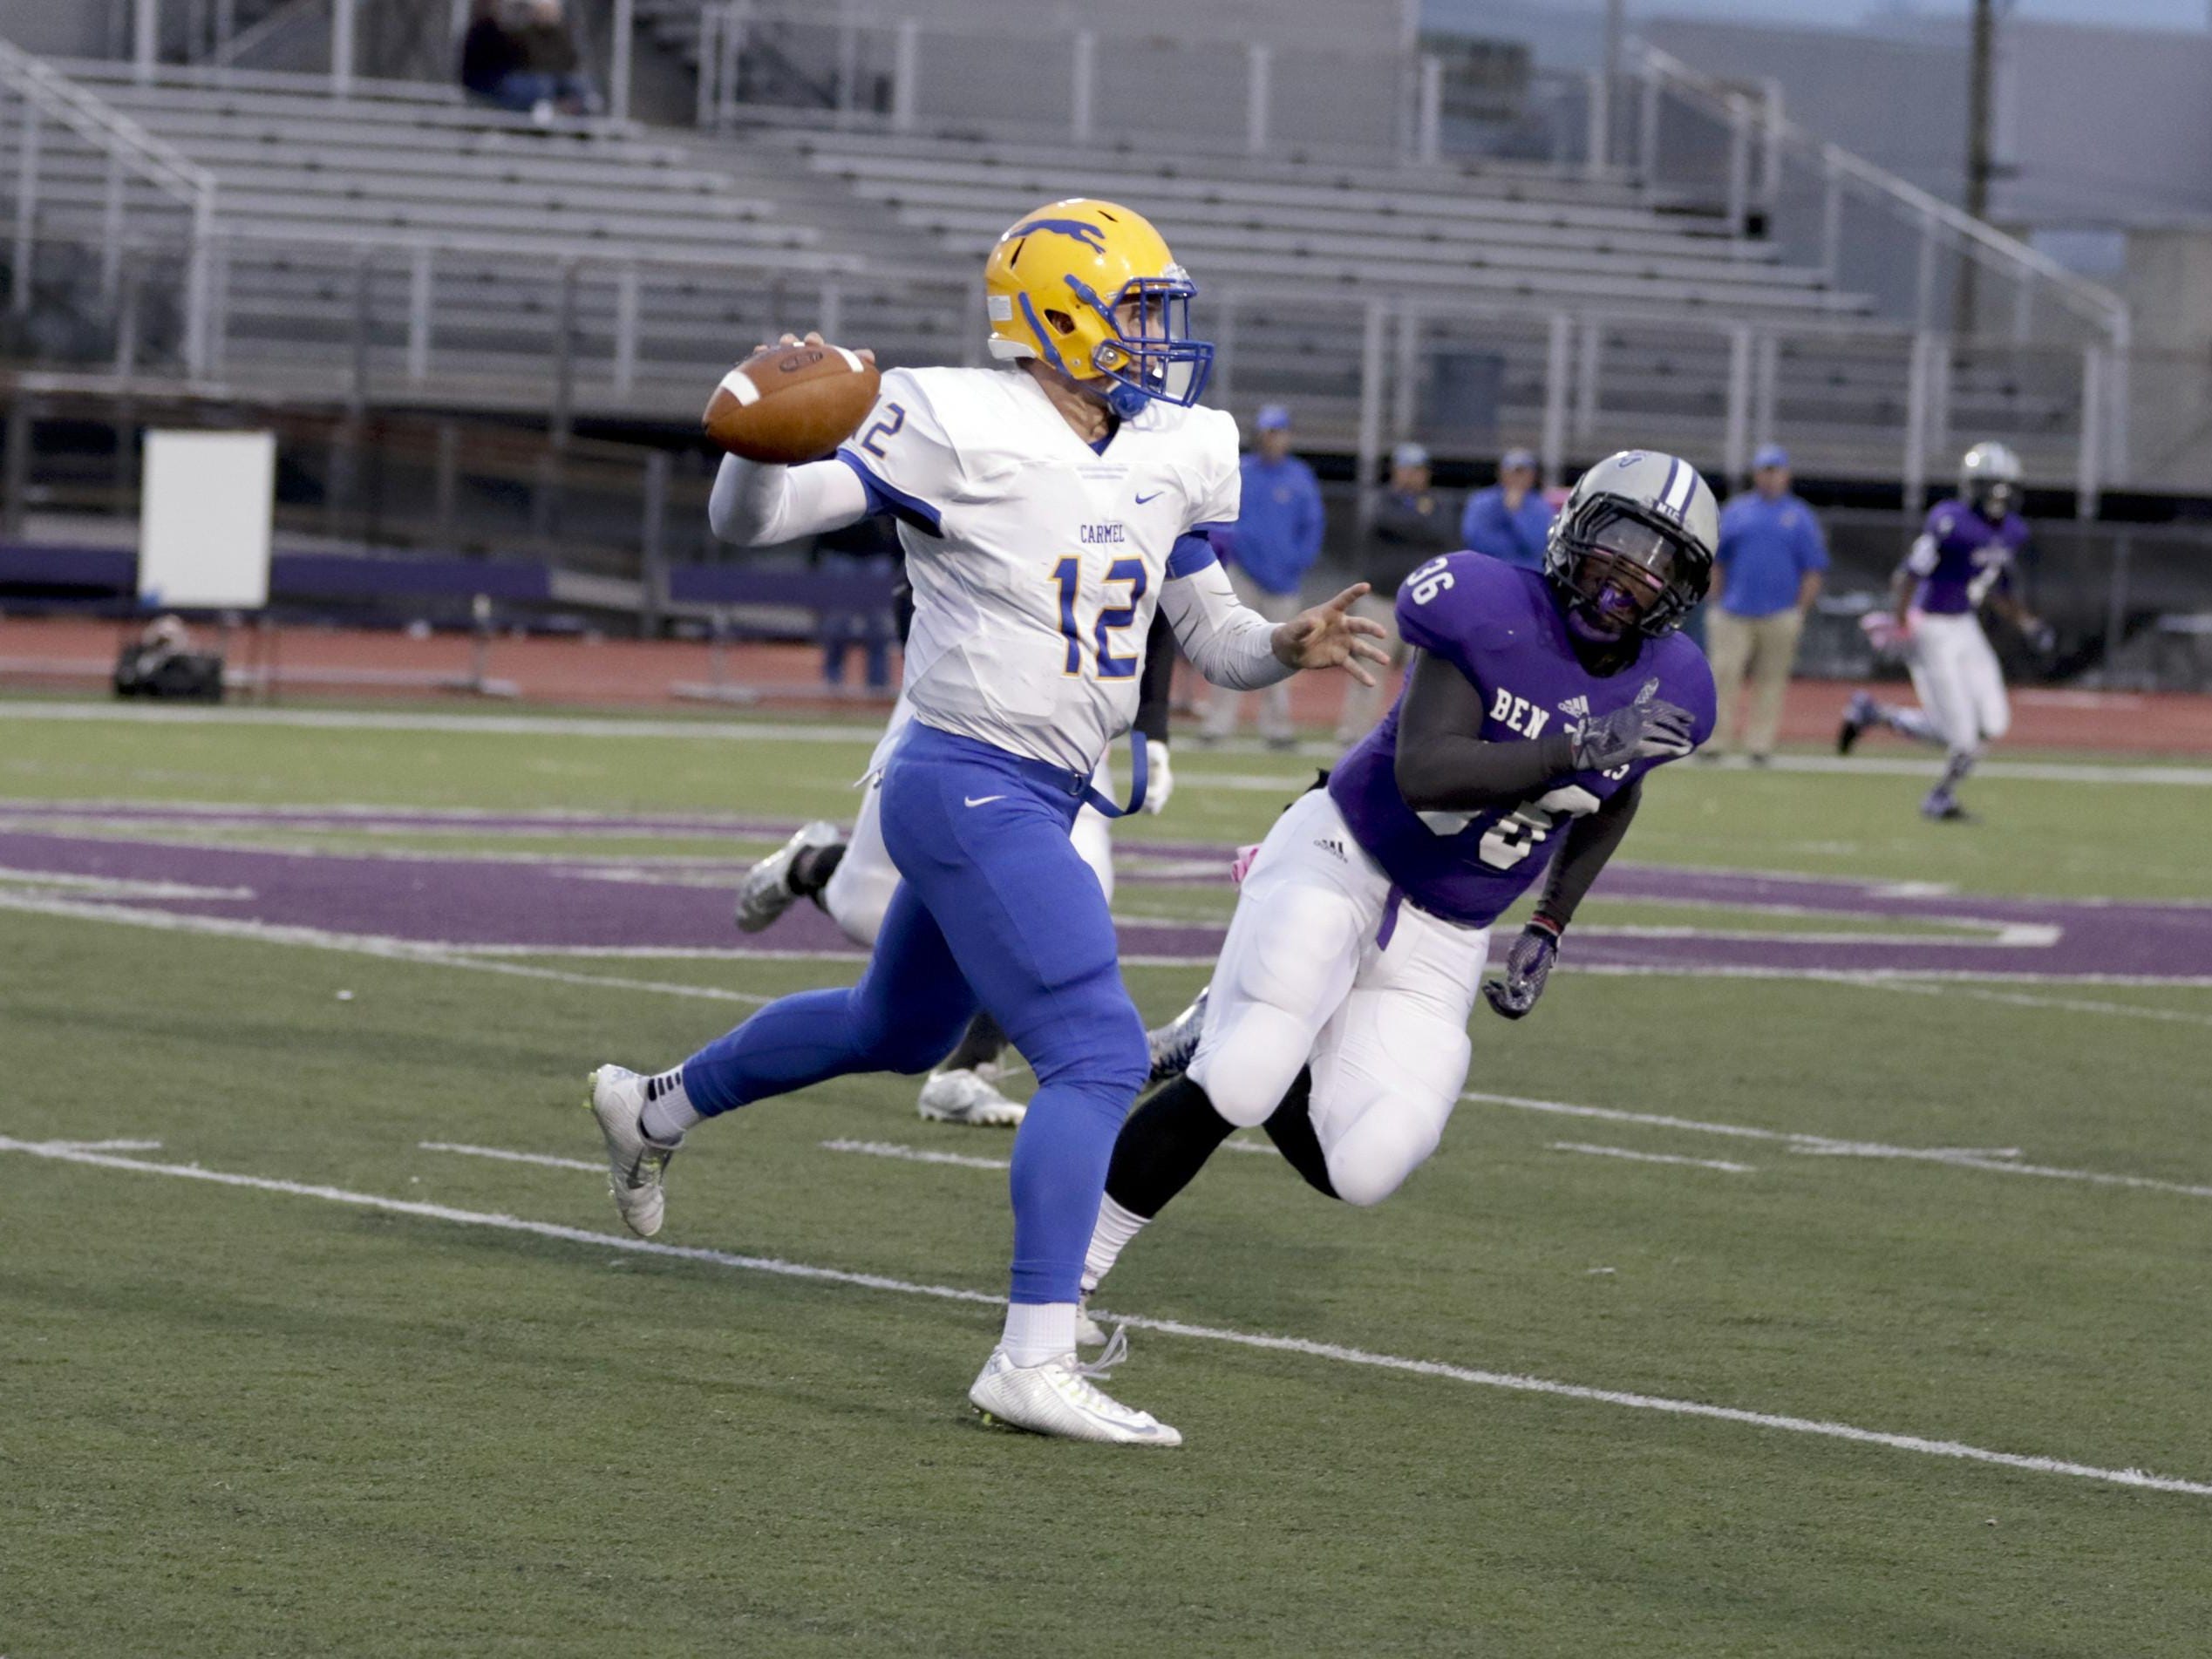 Carmel QB Michael Viktrup looks for a receiver in the Greyhounds’ 35-21 win over Ben Davis on Friday.